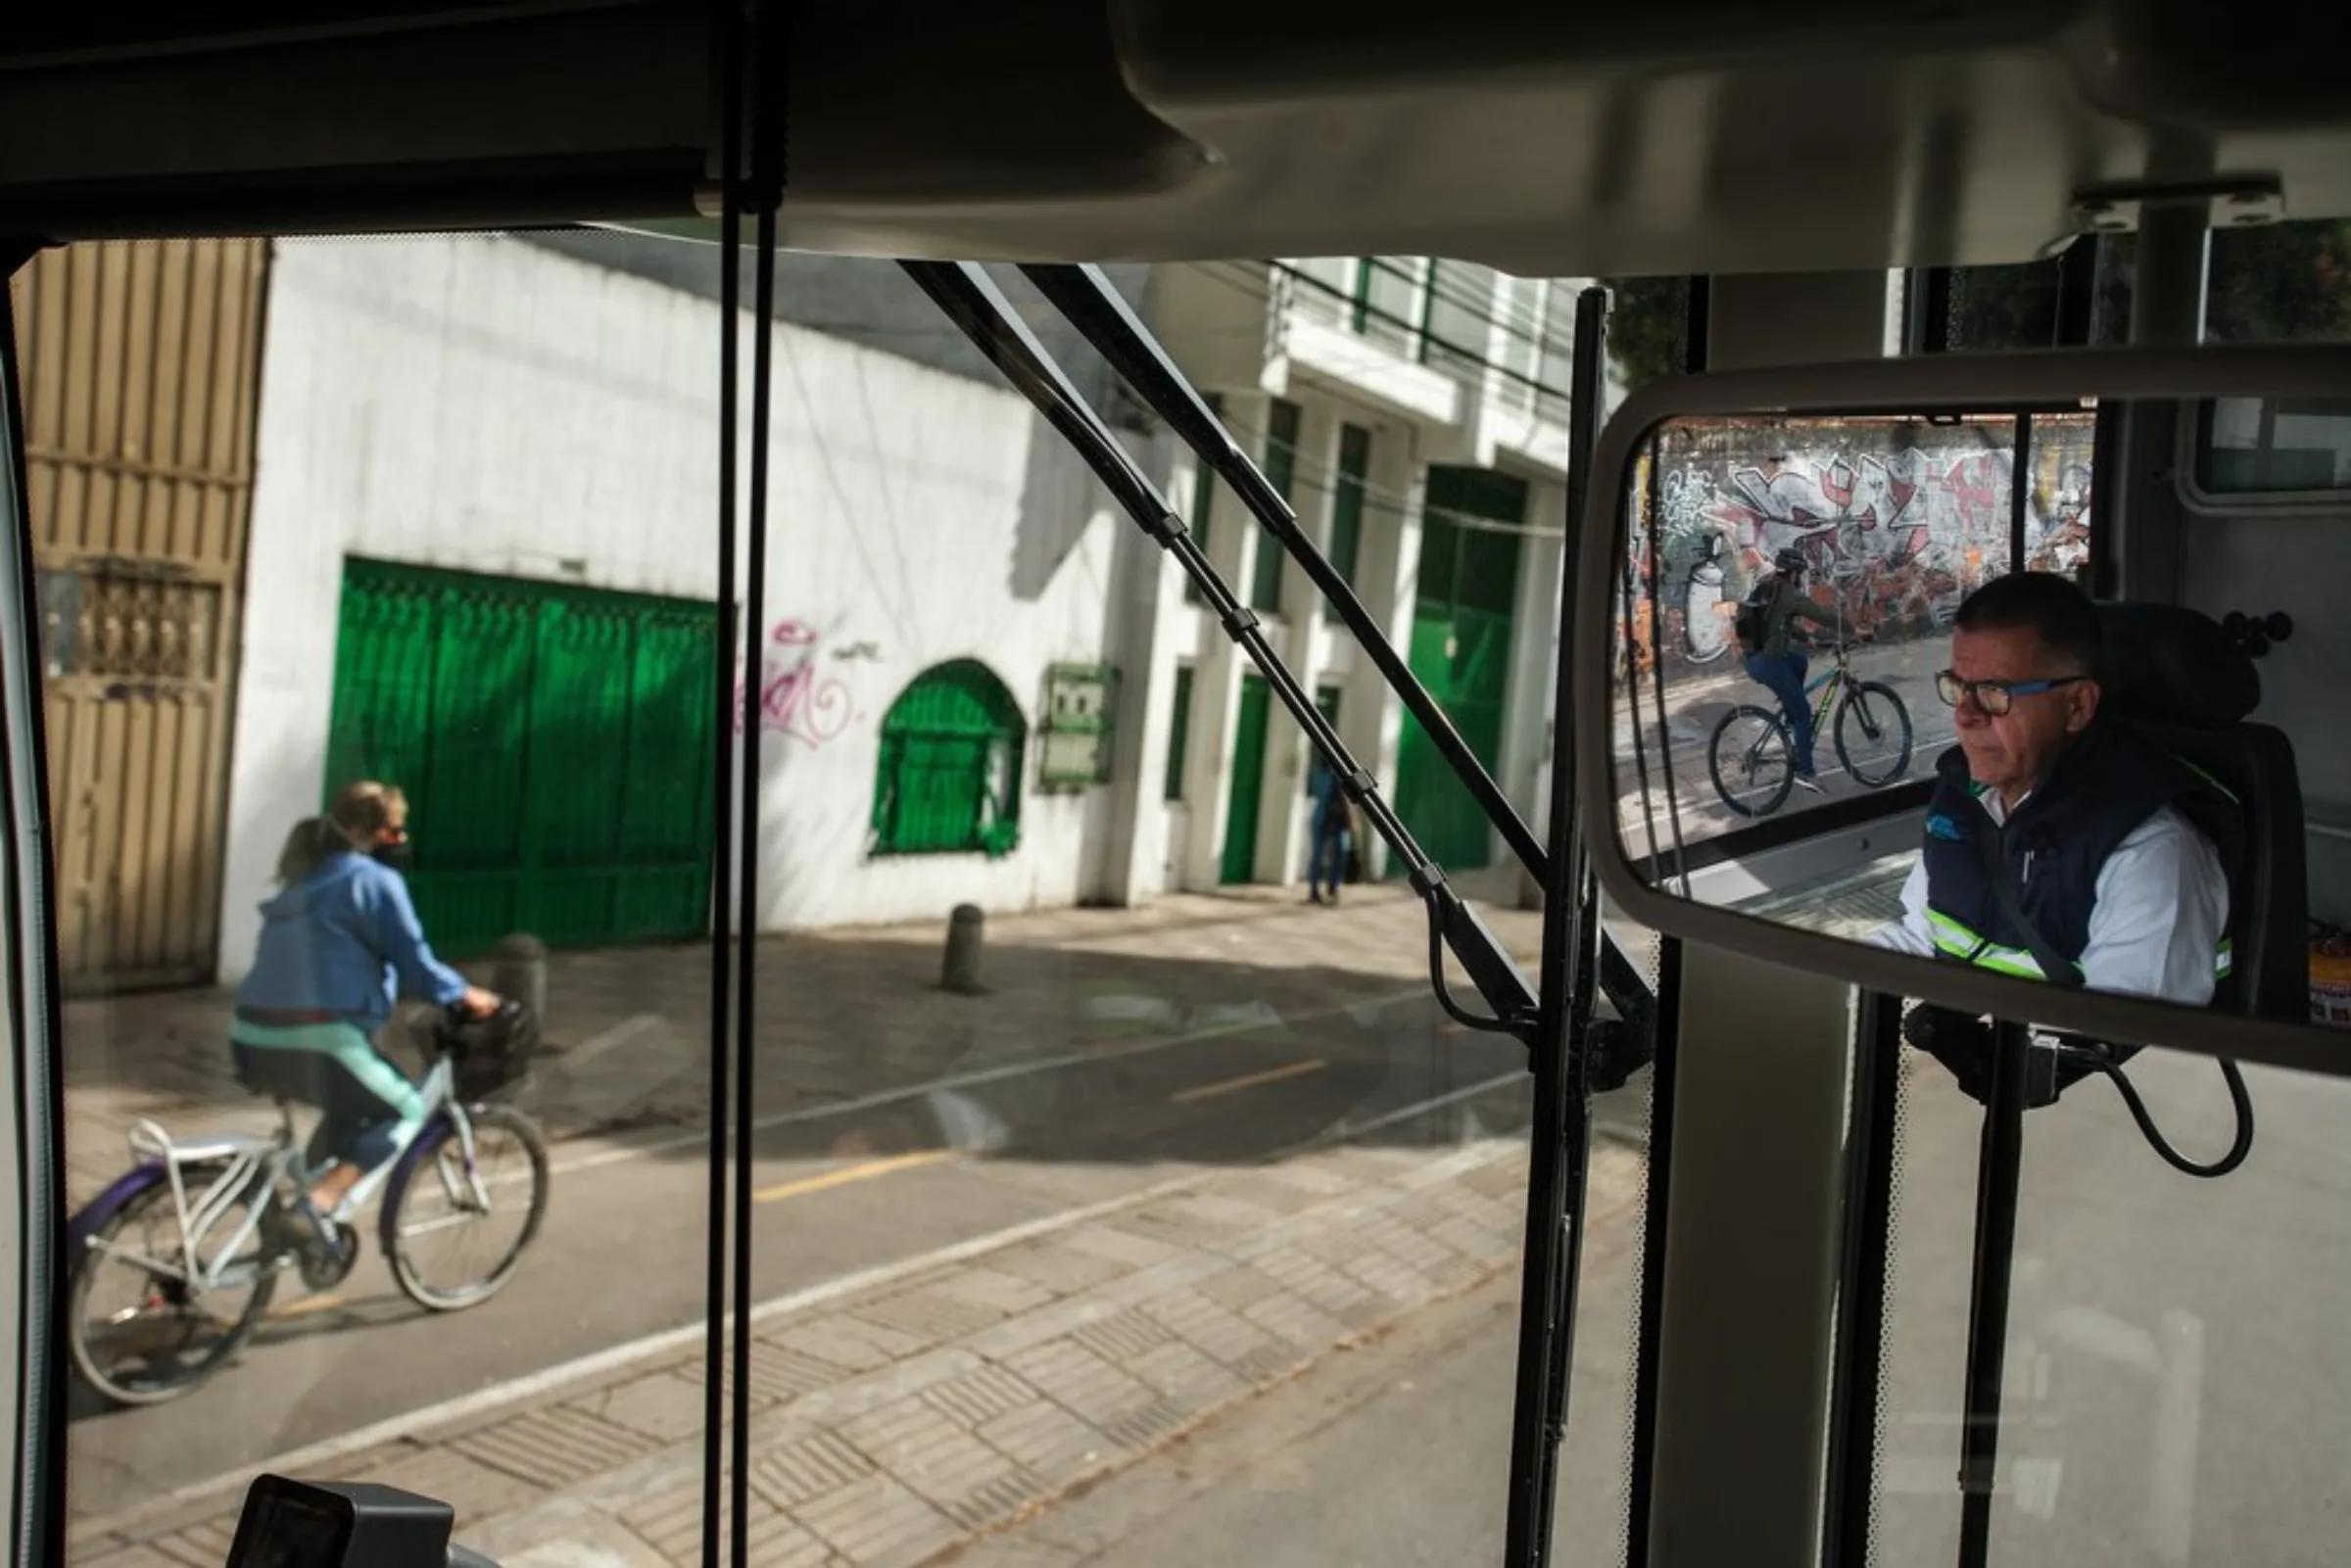 As a cyclist passes, driver Cesar Cantillo operates an electric bus on the road in Bogota, Colombia, April 21, 2021